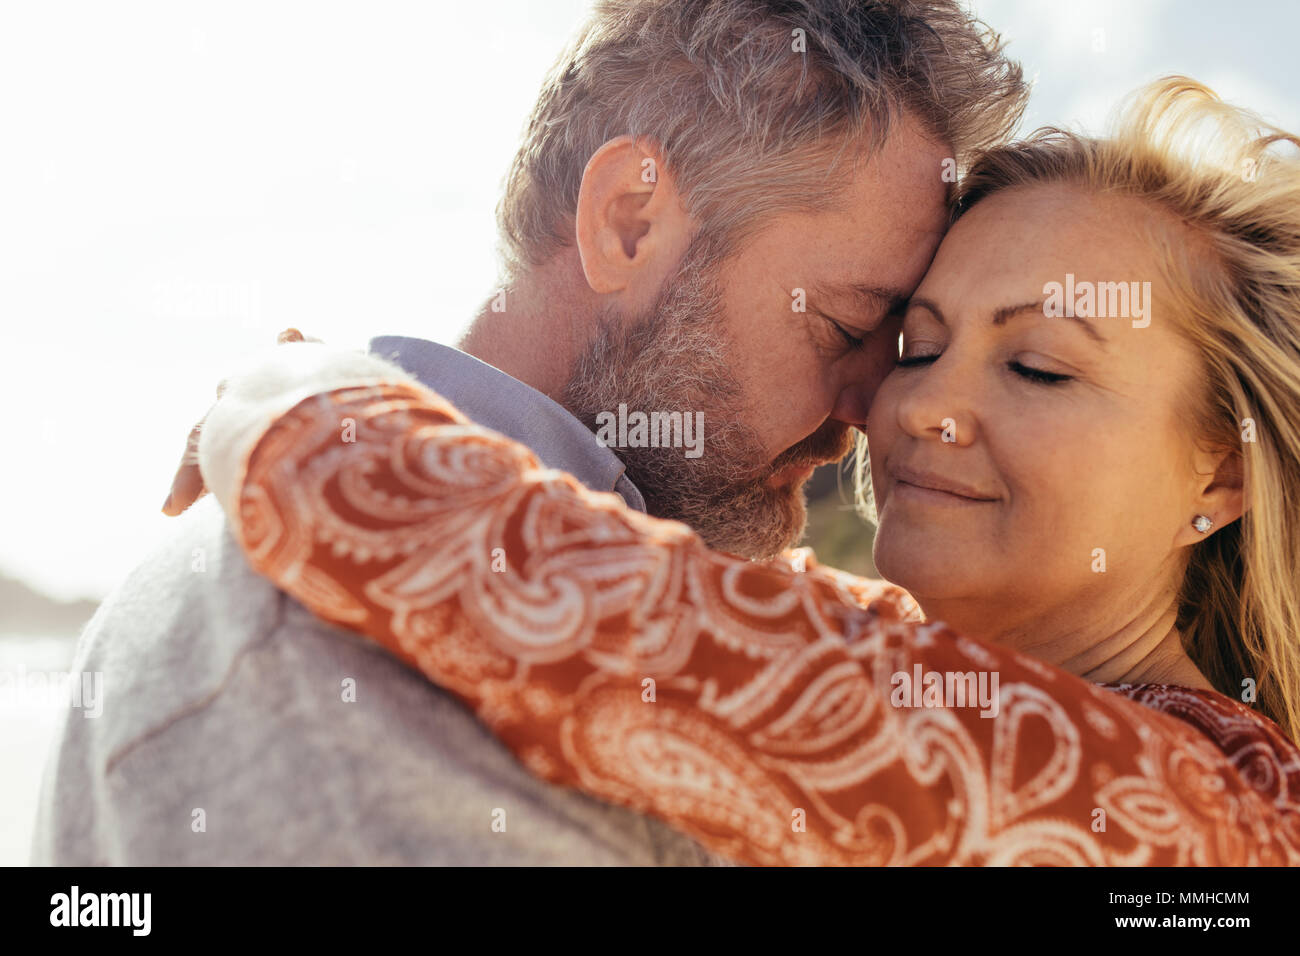 Affectionate senior couple embracing outdoors on beach. Beautiful mature woman being embraced by her loving husband on the beach. Stock Photo